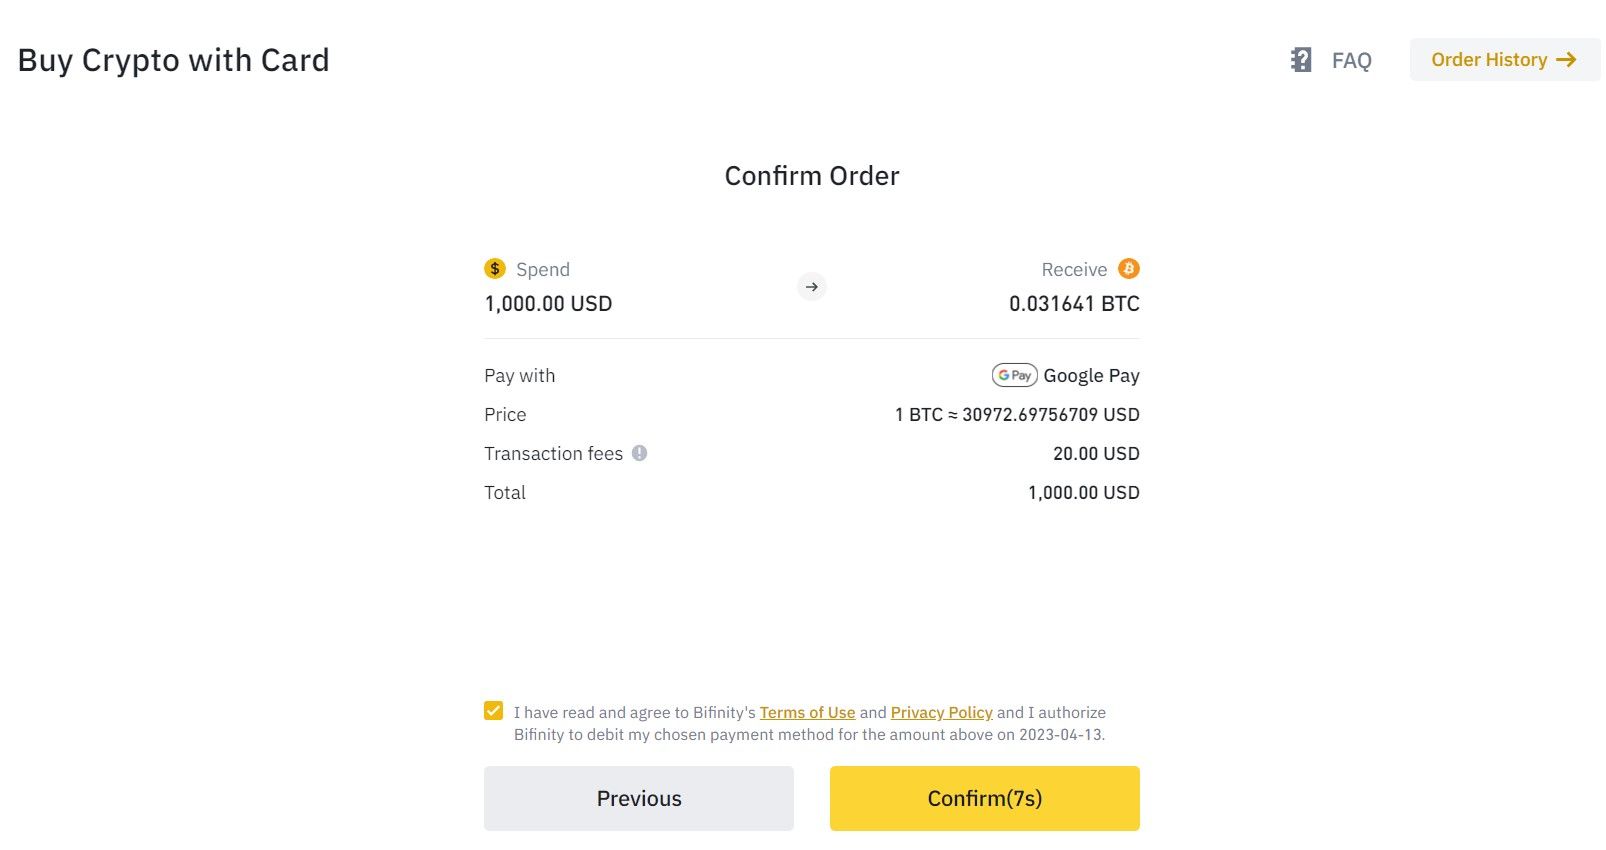 Confirm the Google Pay transaction